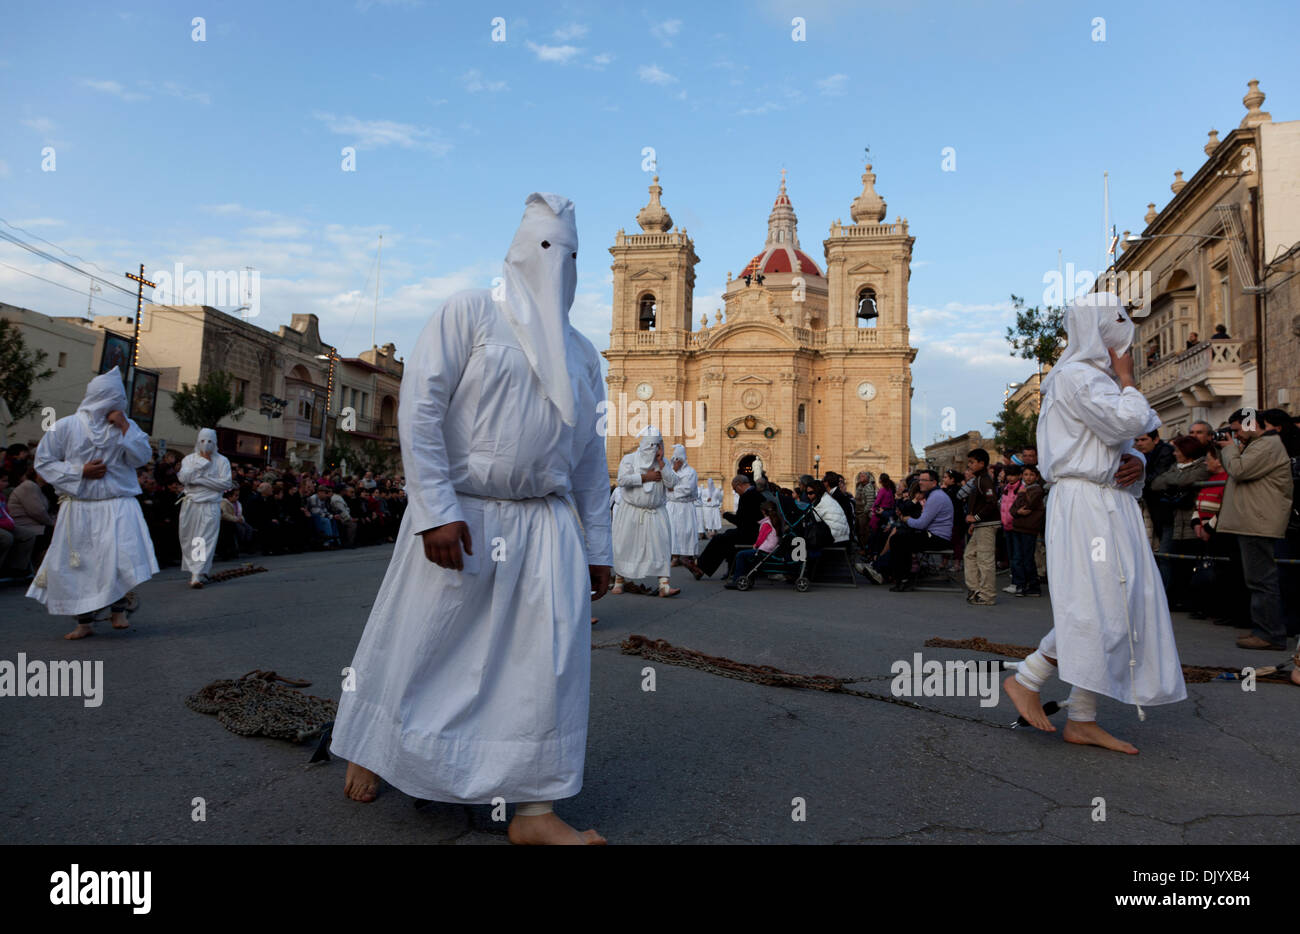 Robed and hooded penitents drag bundles of chains throughout the streets during Good Firday in Malta as a form of penance.  Stock Photo